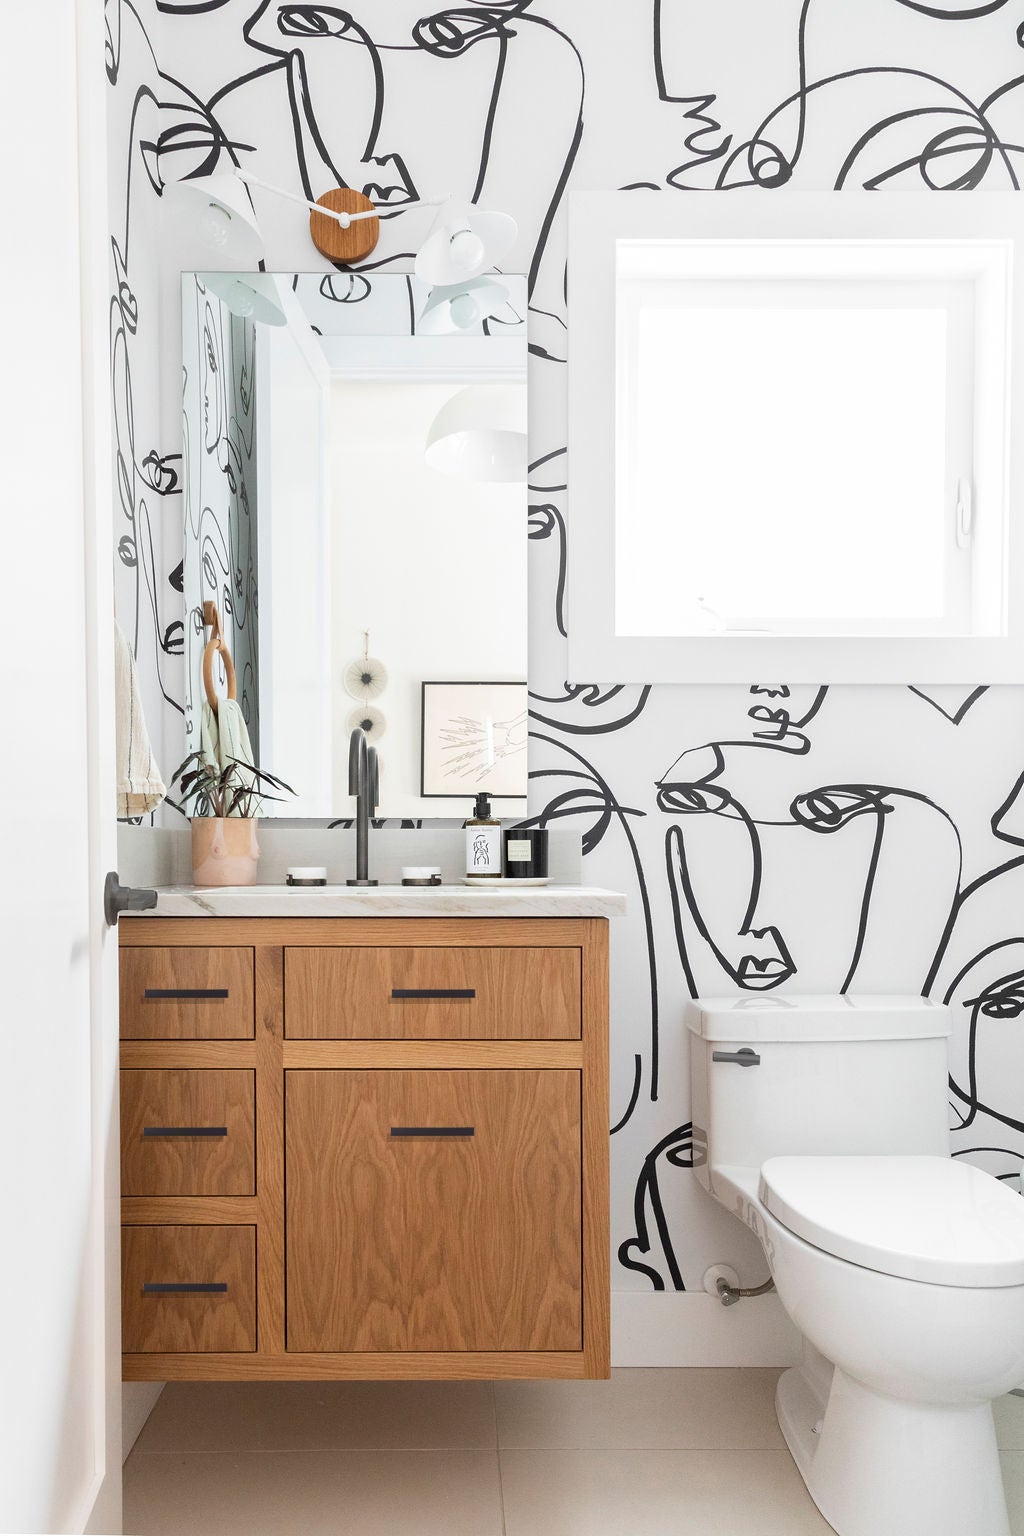 Powder room with face wallpaper